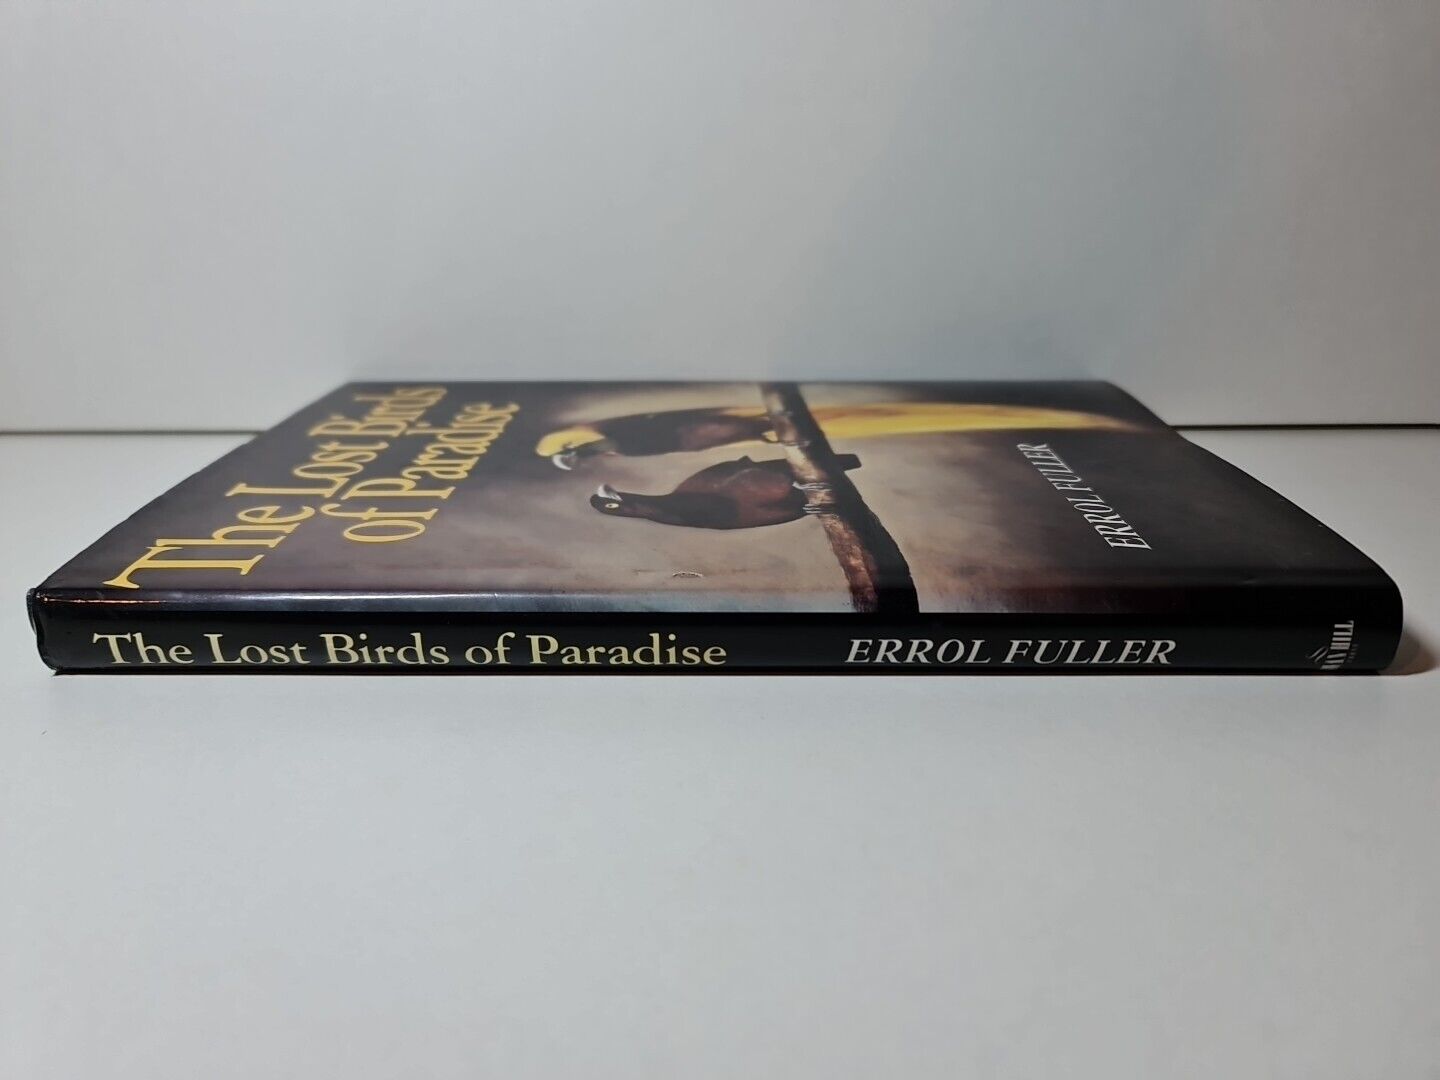 The Lost Birds of Paradise by Errol Fuller (1995)